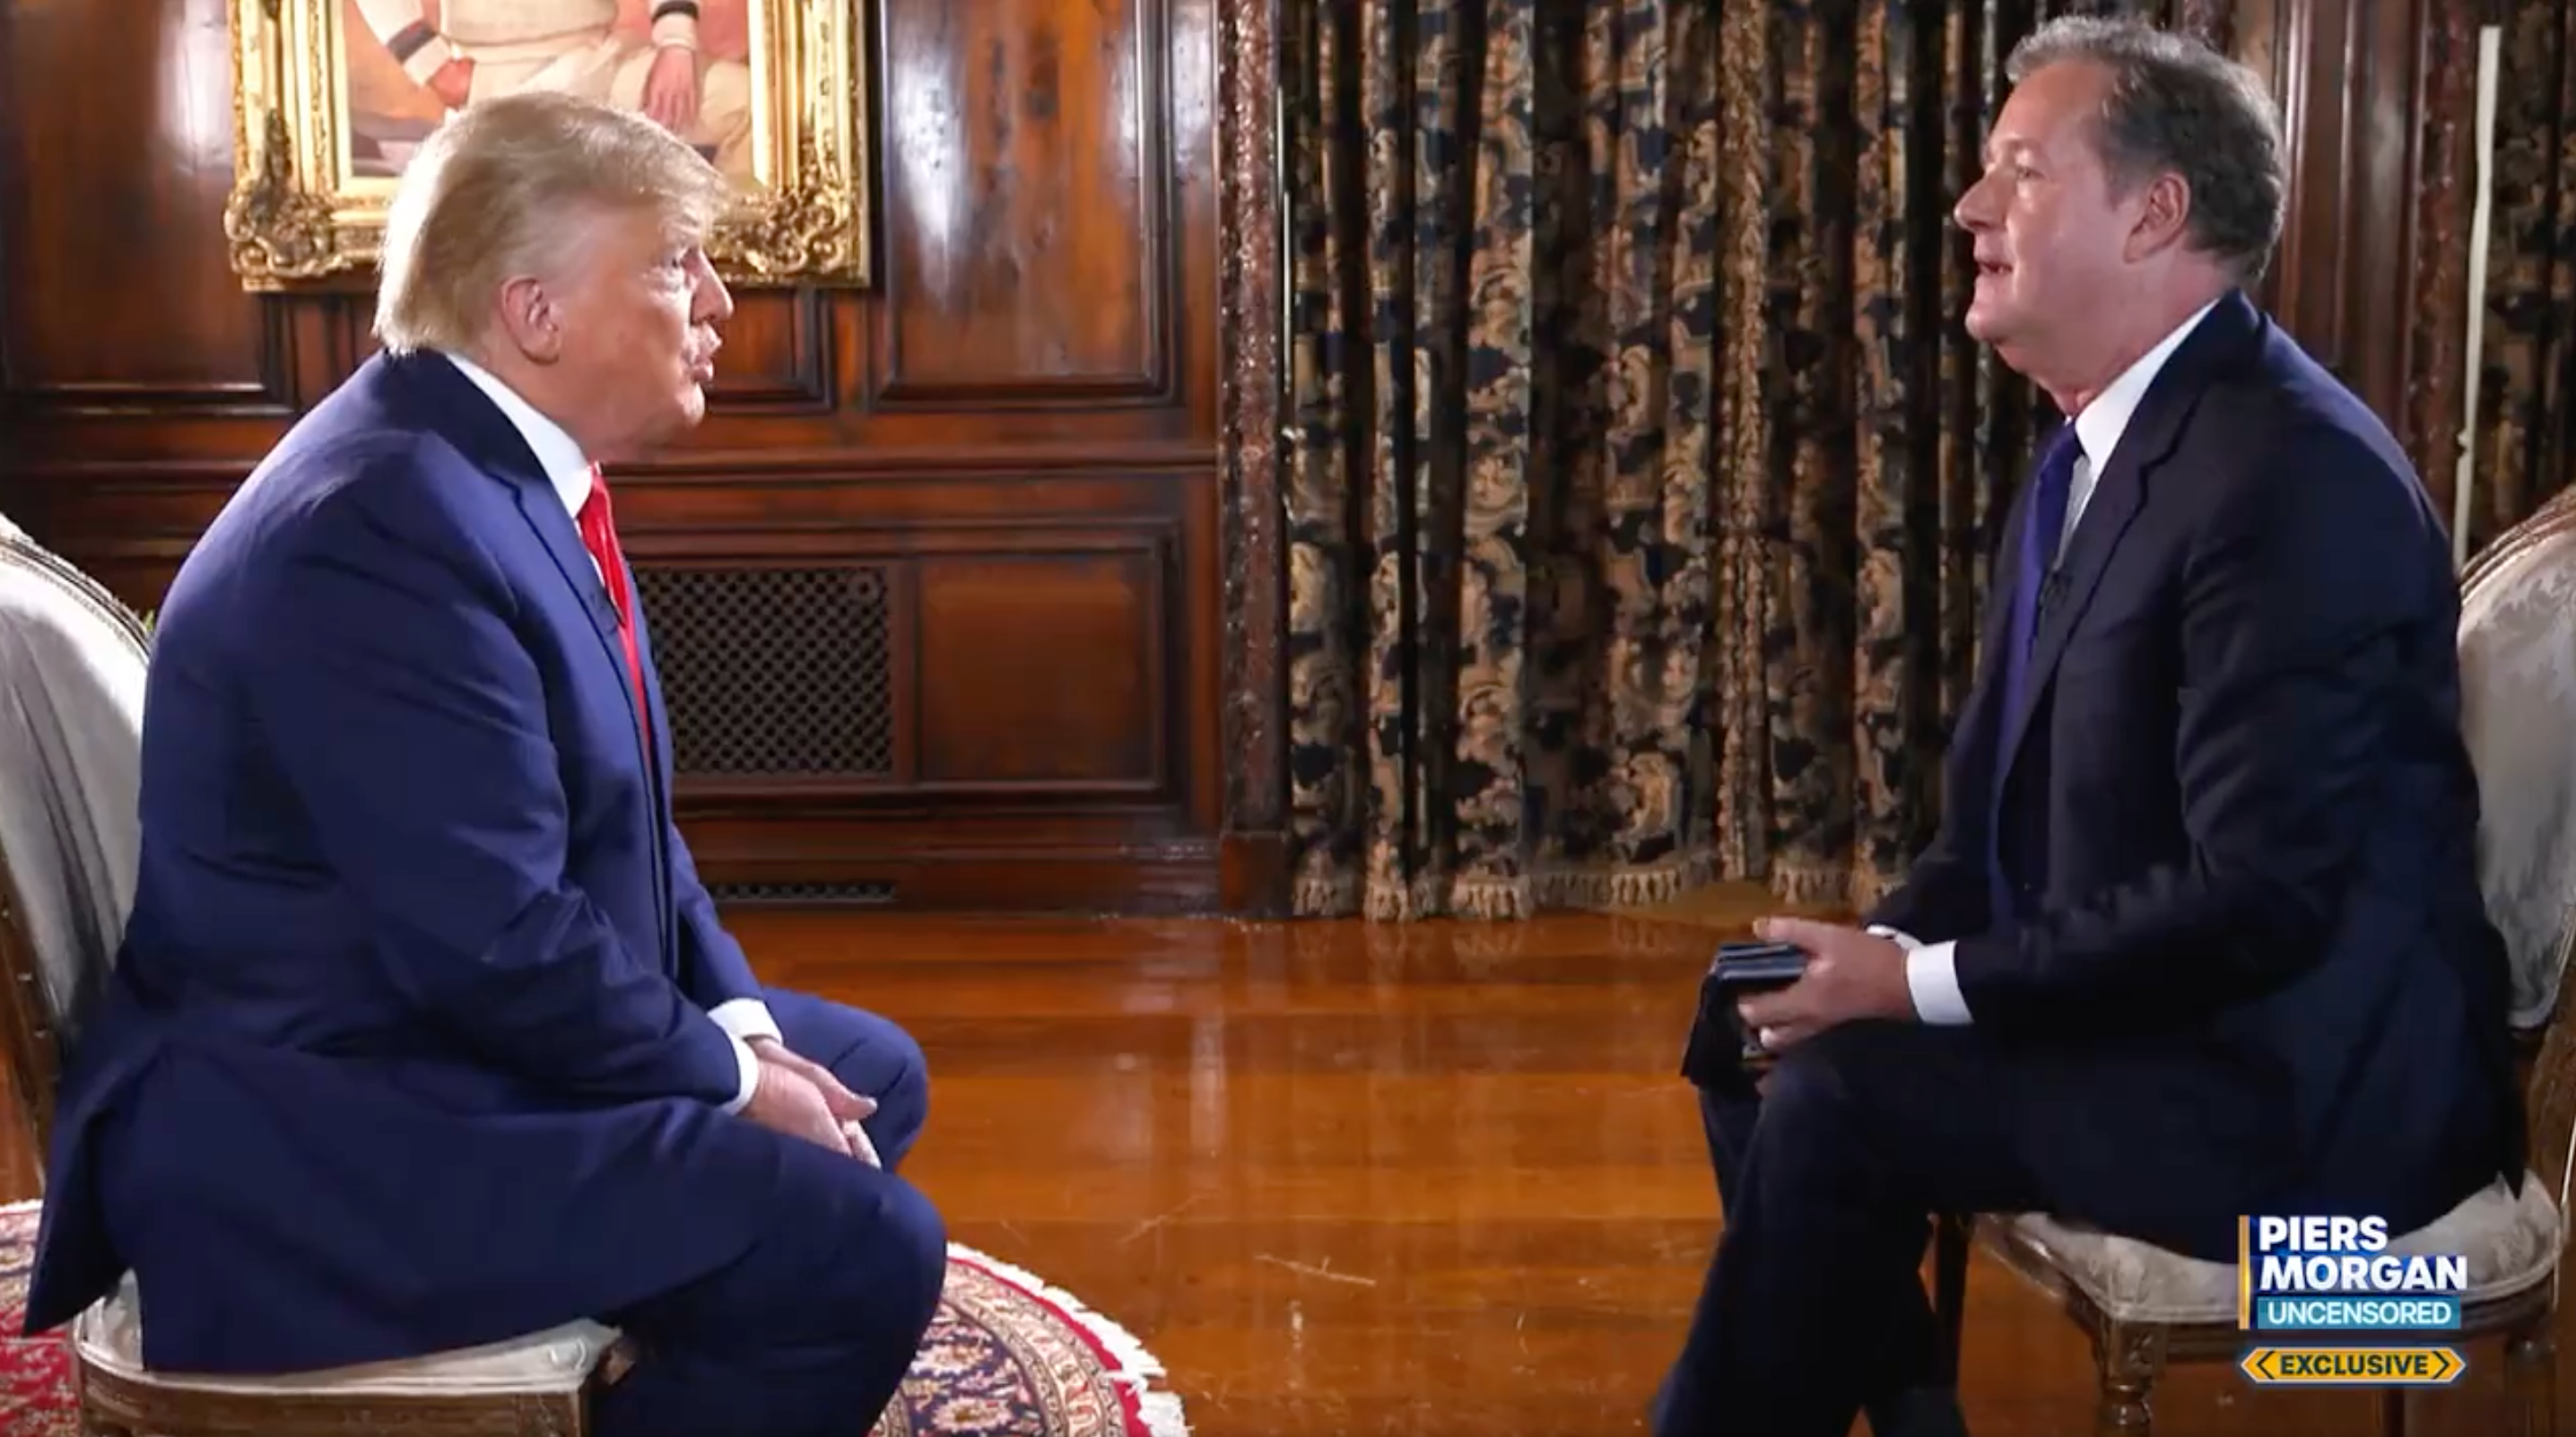 Donald Trump interviewed by Piers Morgan on ‘Uncensored’